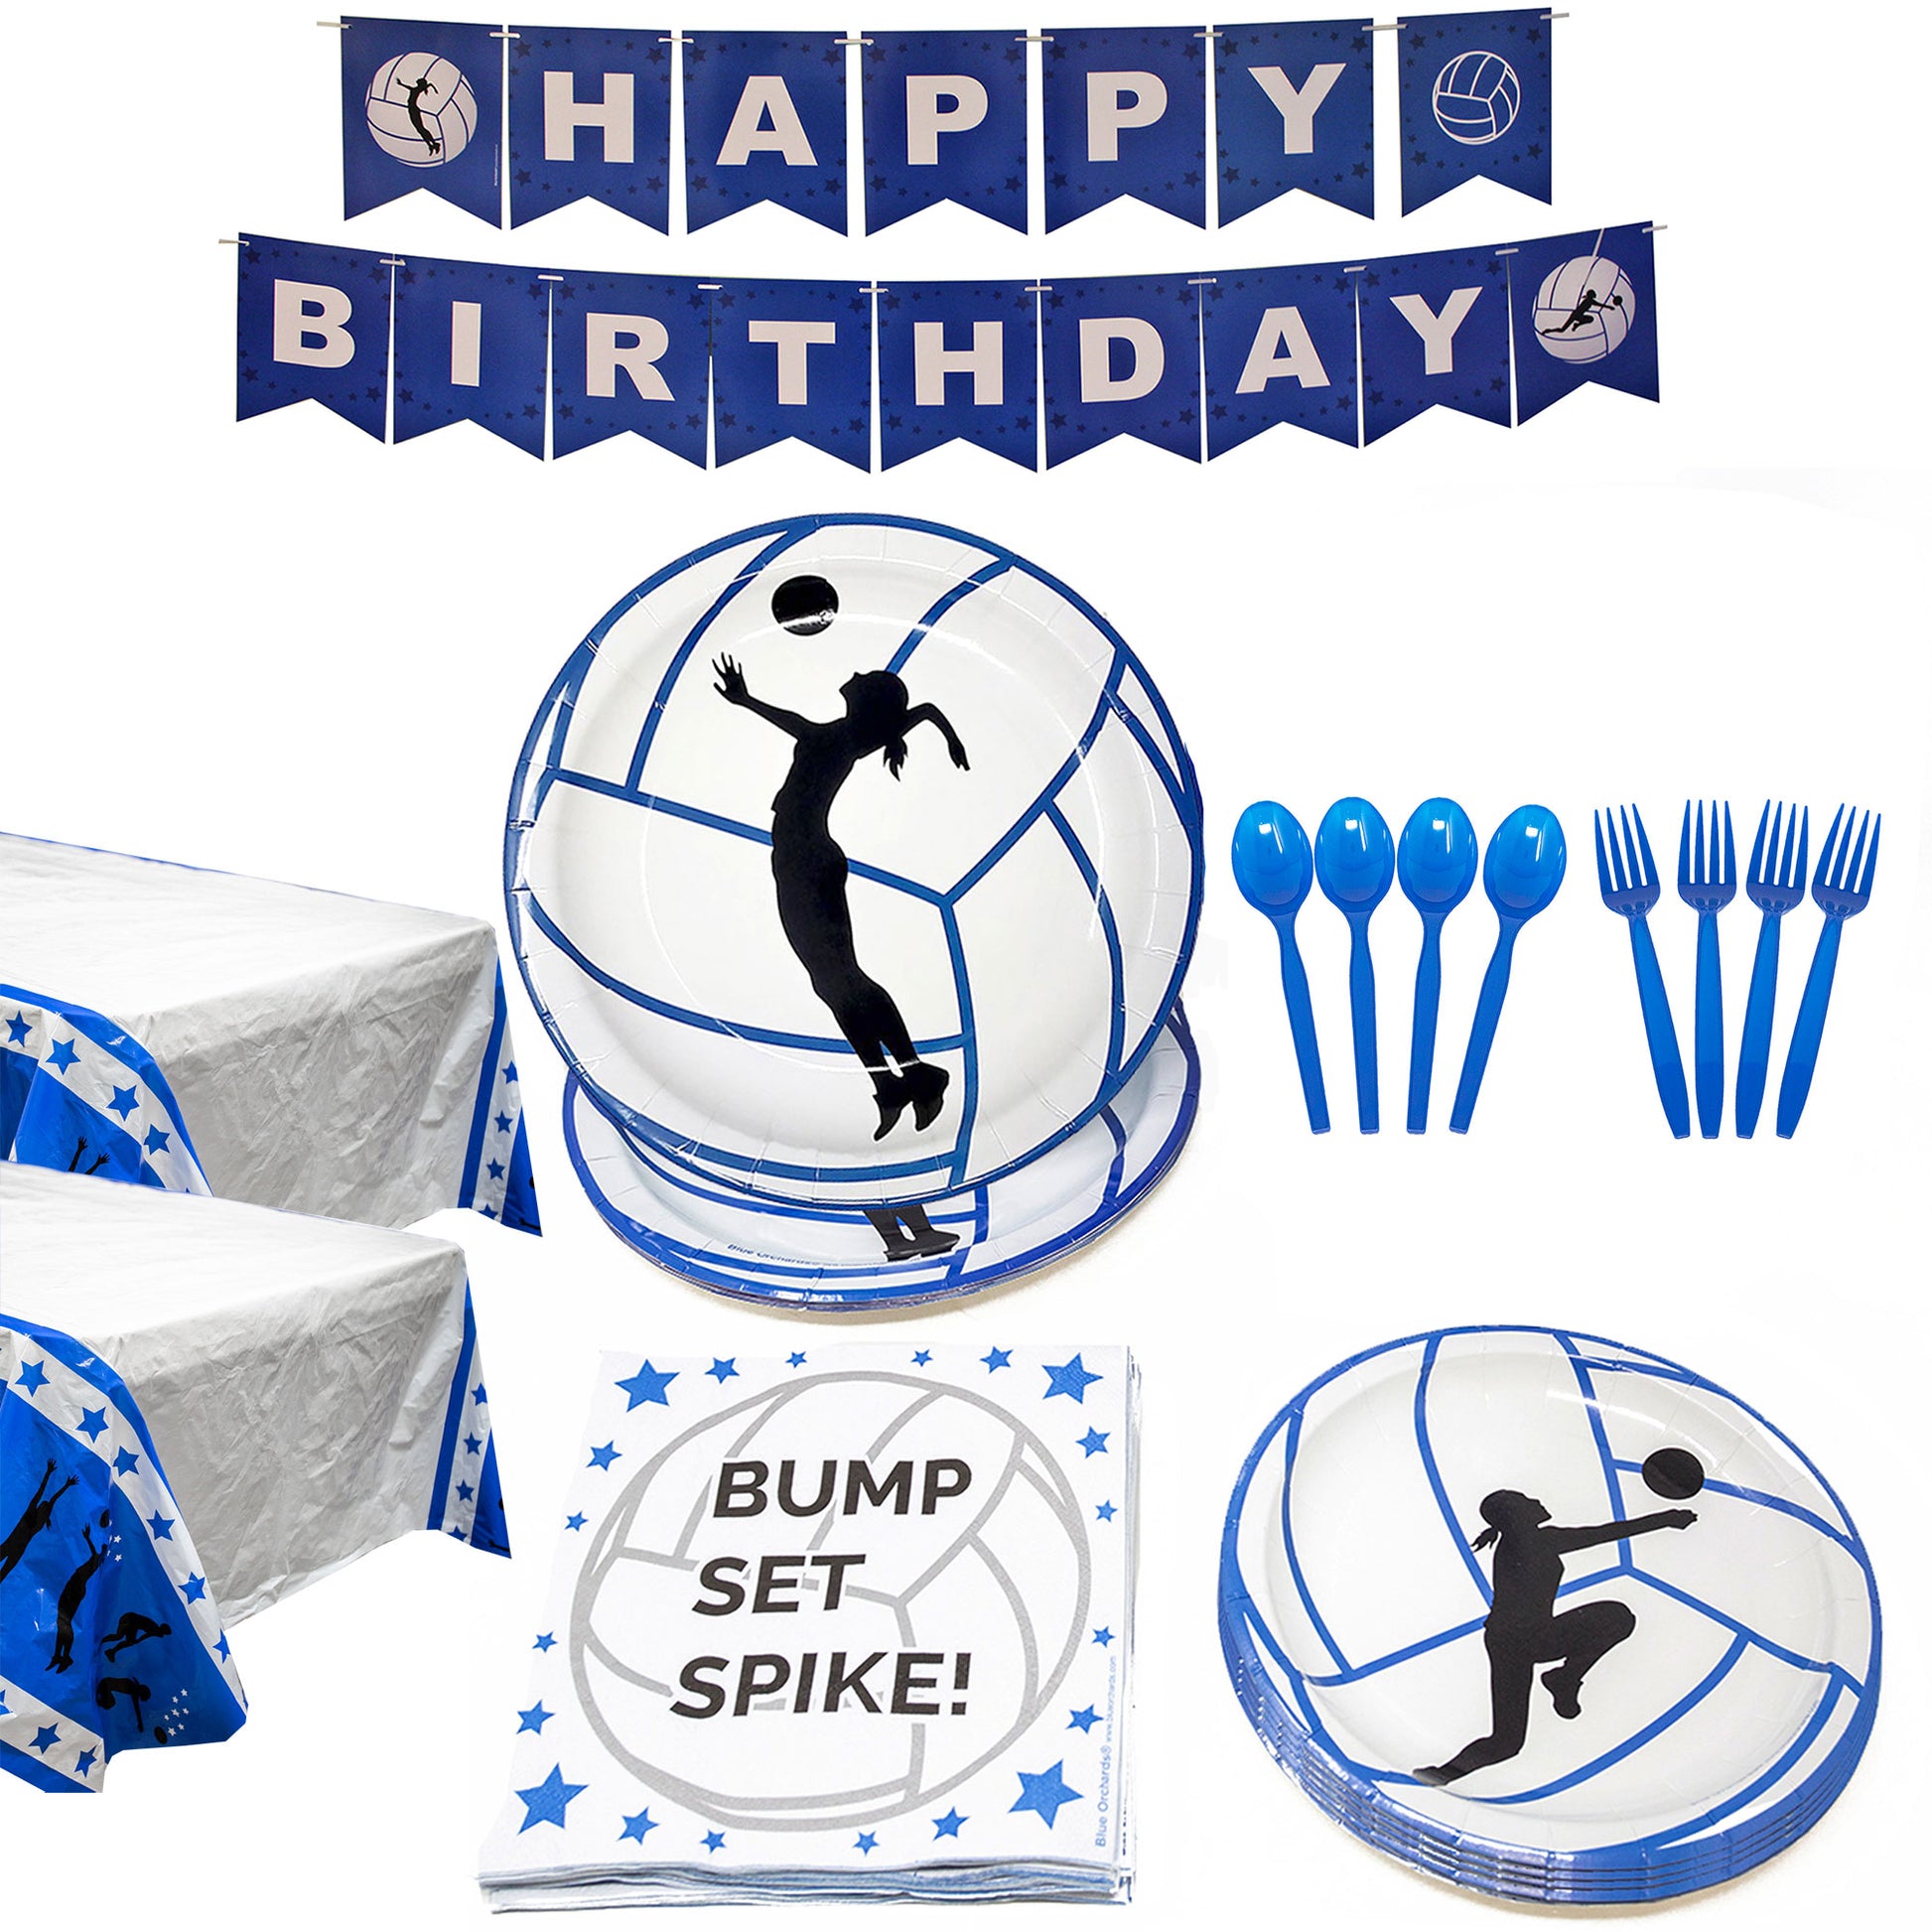 volleyball party suppliesvolleyball room decorationsvolleyball decorationsvolleyball theme party suppliesvolleyball birthday decorationsvolleyball napkins and platesvolleyball decorations partyvolleyball napkinsvolleyball birthdayvolleyb